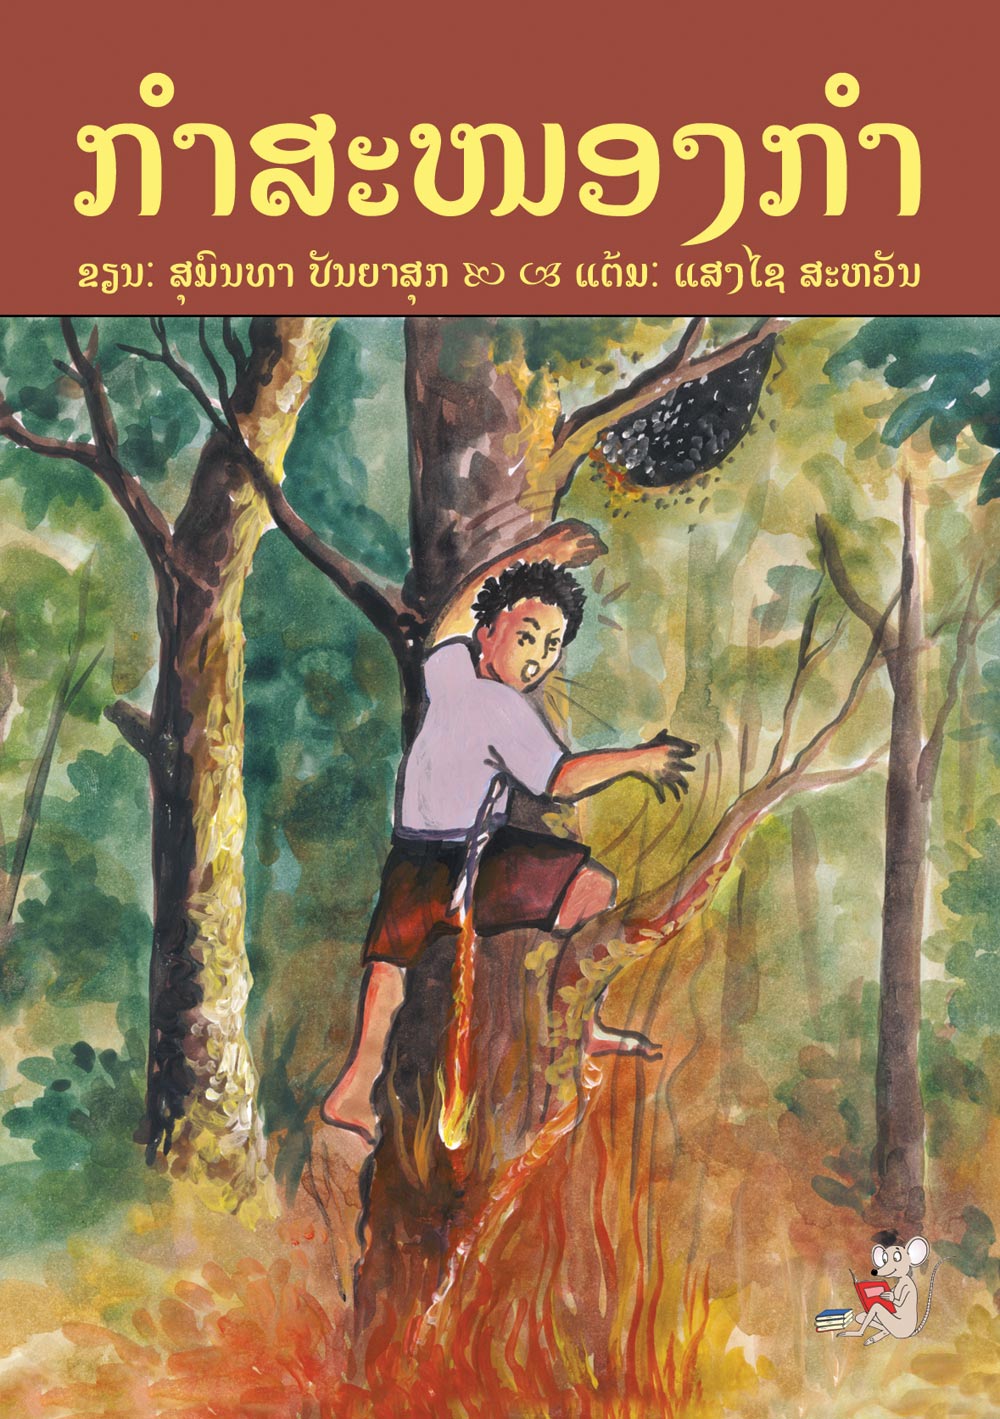 Kamsanongkam large book cover, published in Lao language